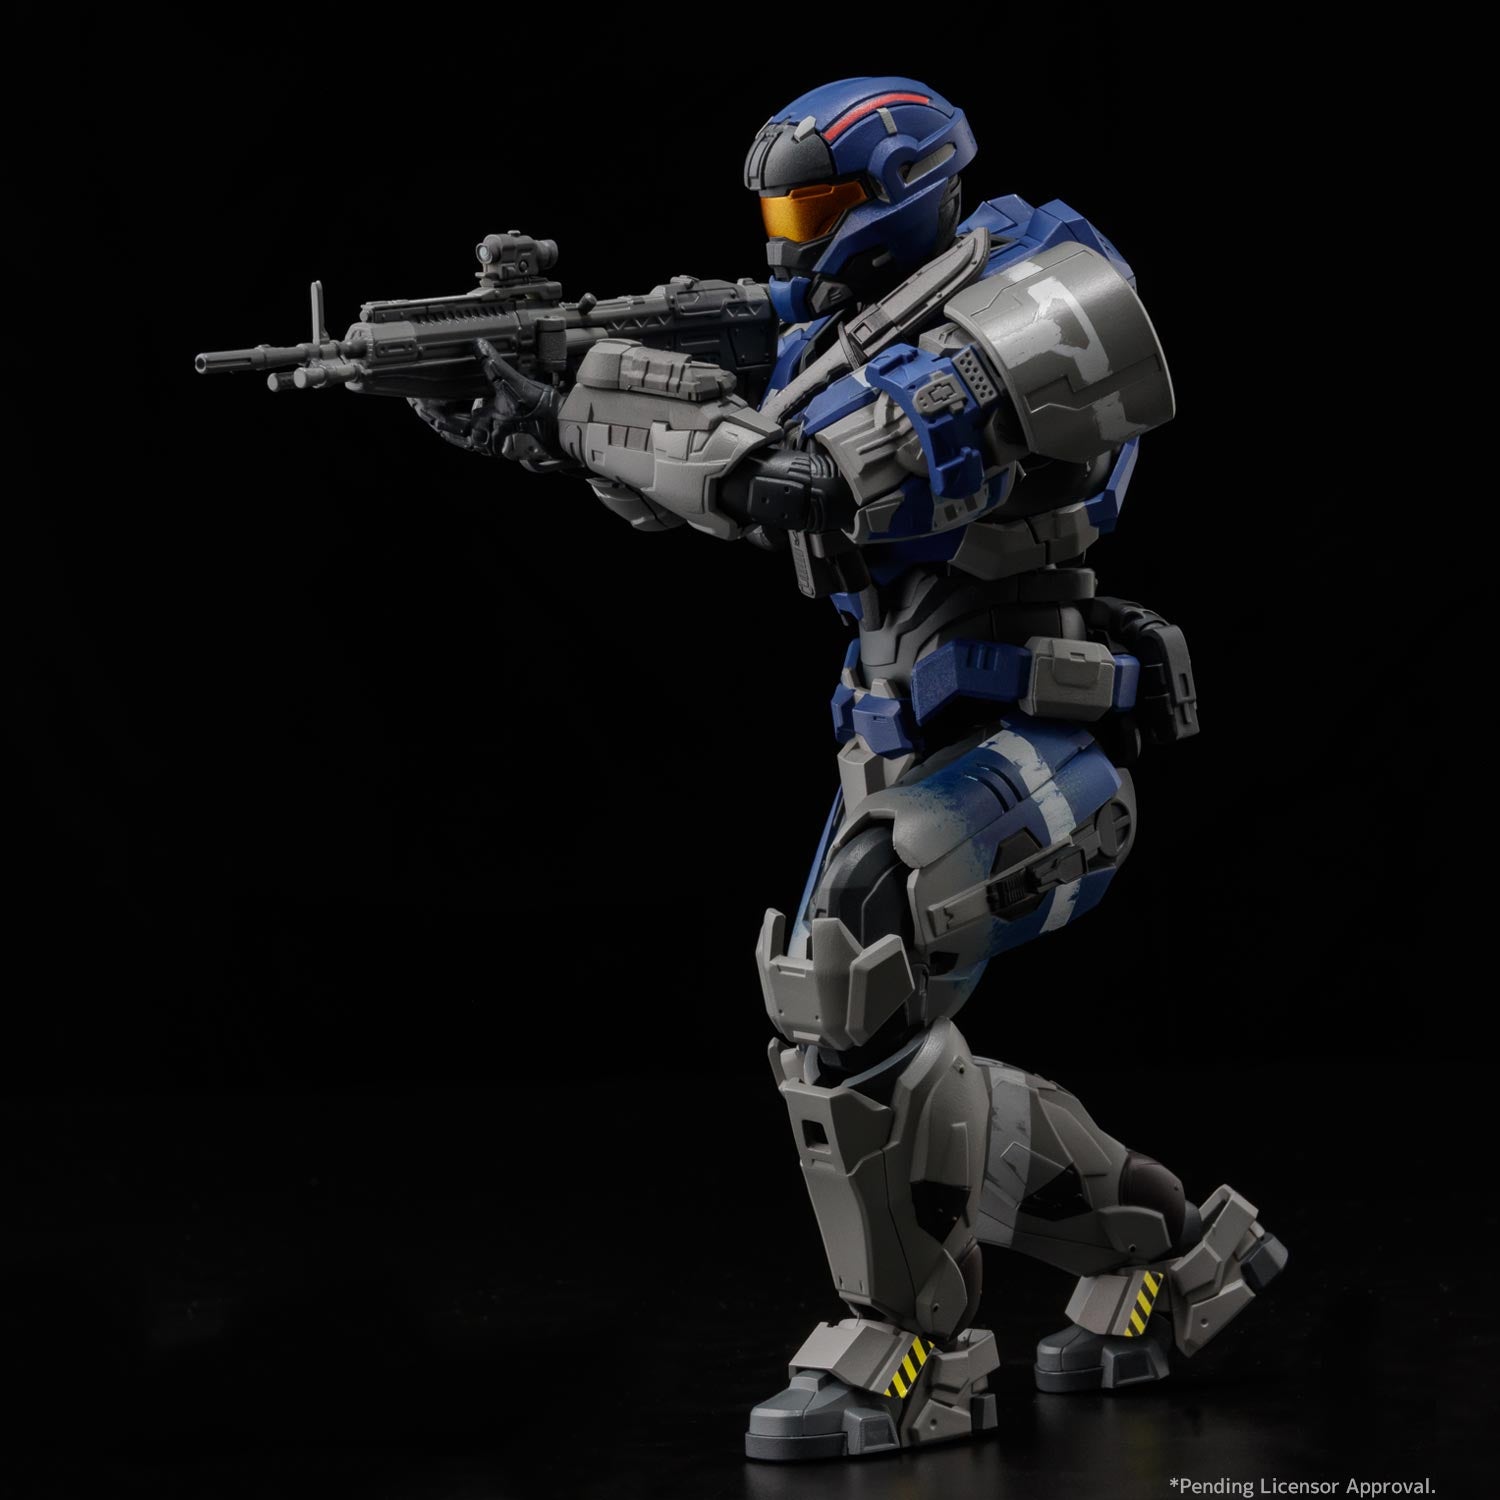 1000toys - Re:Edit - Halo: Reach - Carter-A259 (Noble One) (1/12 Scale) - Marvelous Toys